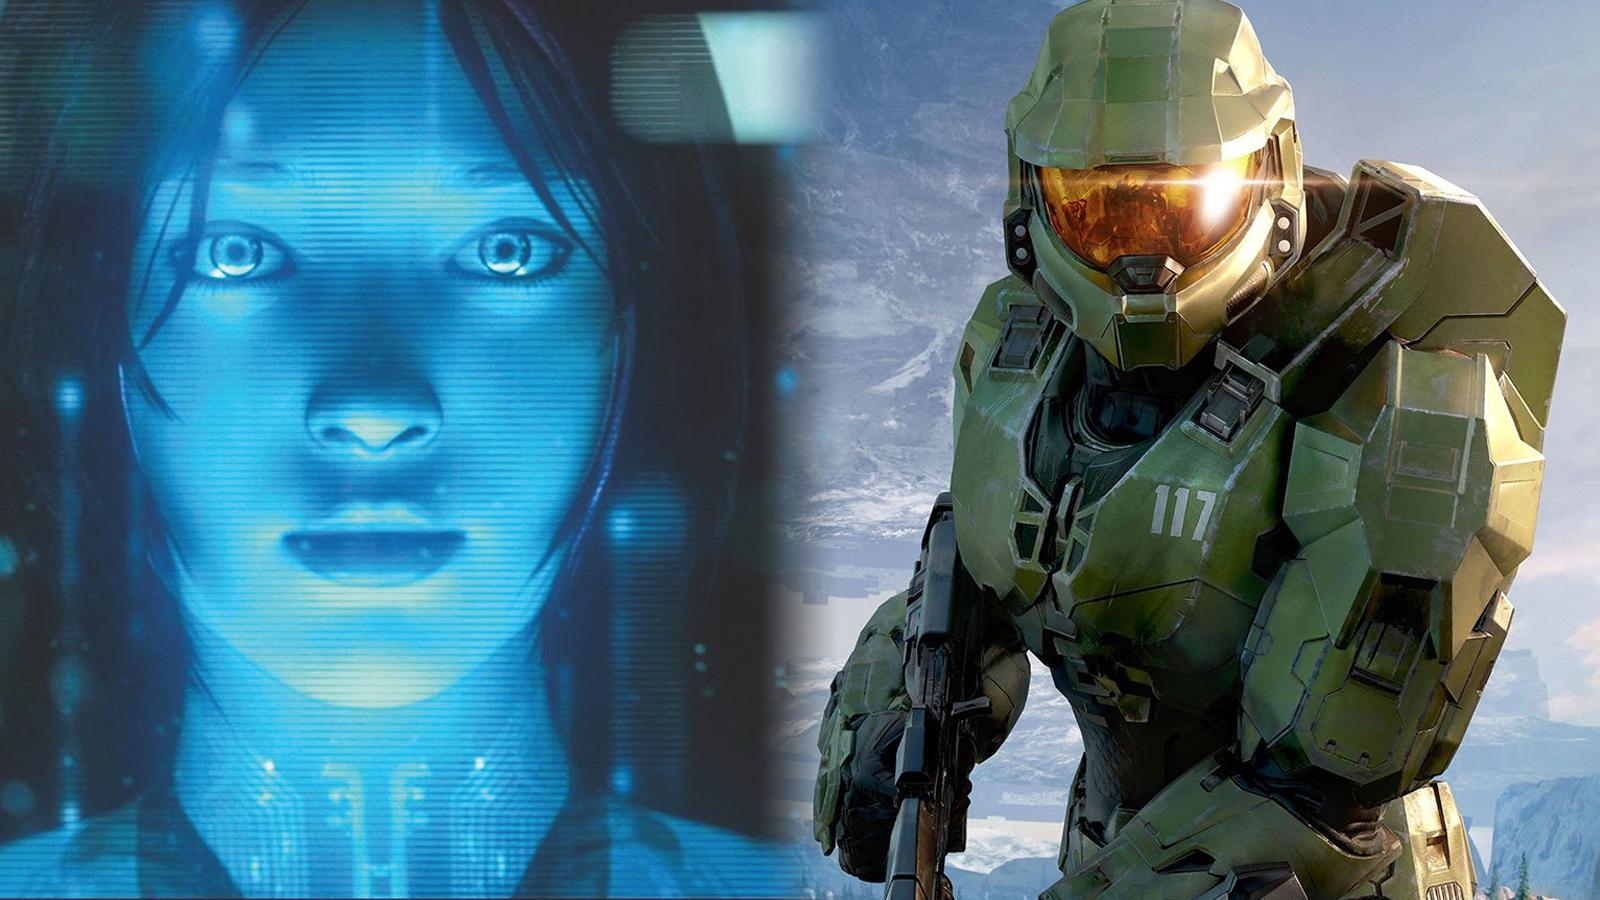 Halo S01 E05 Clip  Master Chief Asks Cortana About The Origins of